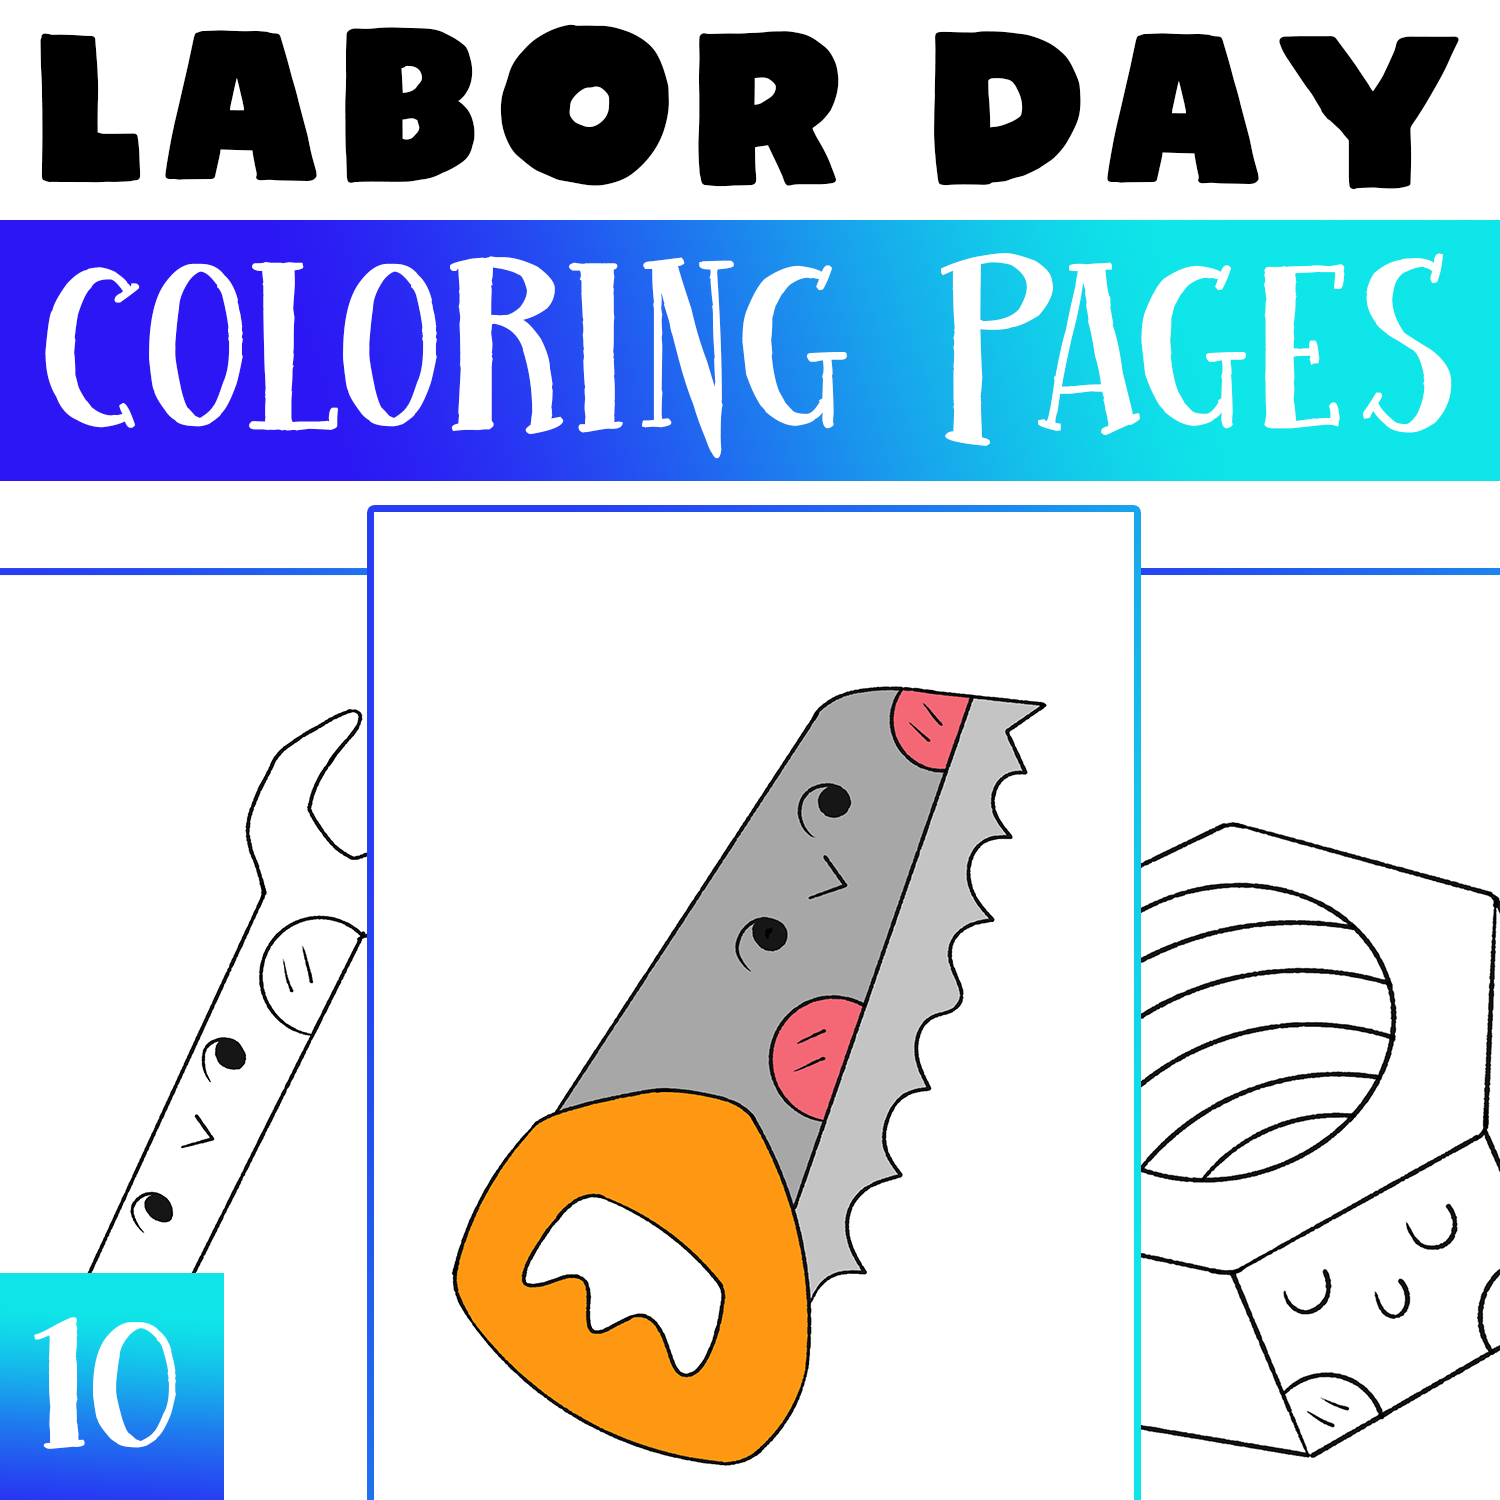 Labor day coloring pages international workers day coloring worksheet activity made by teachers